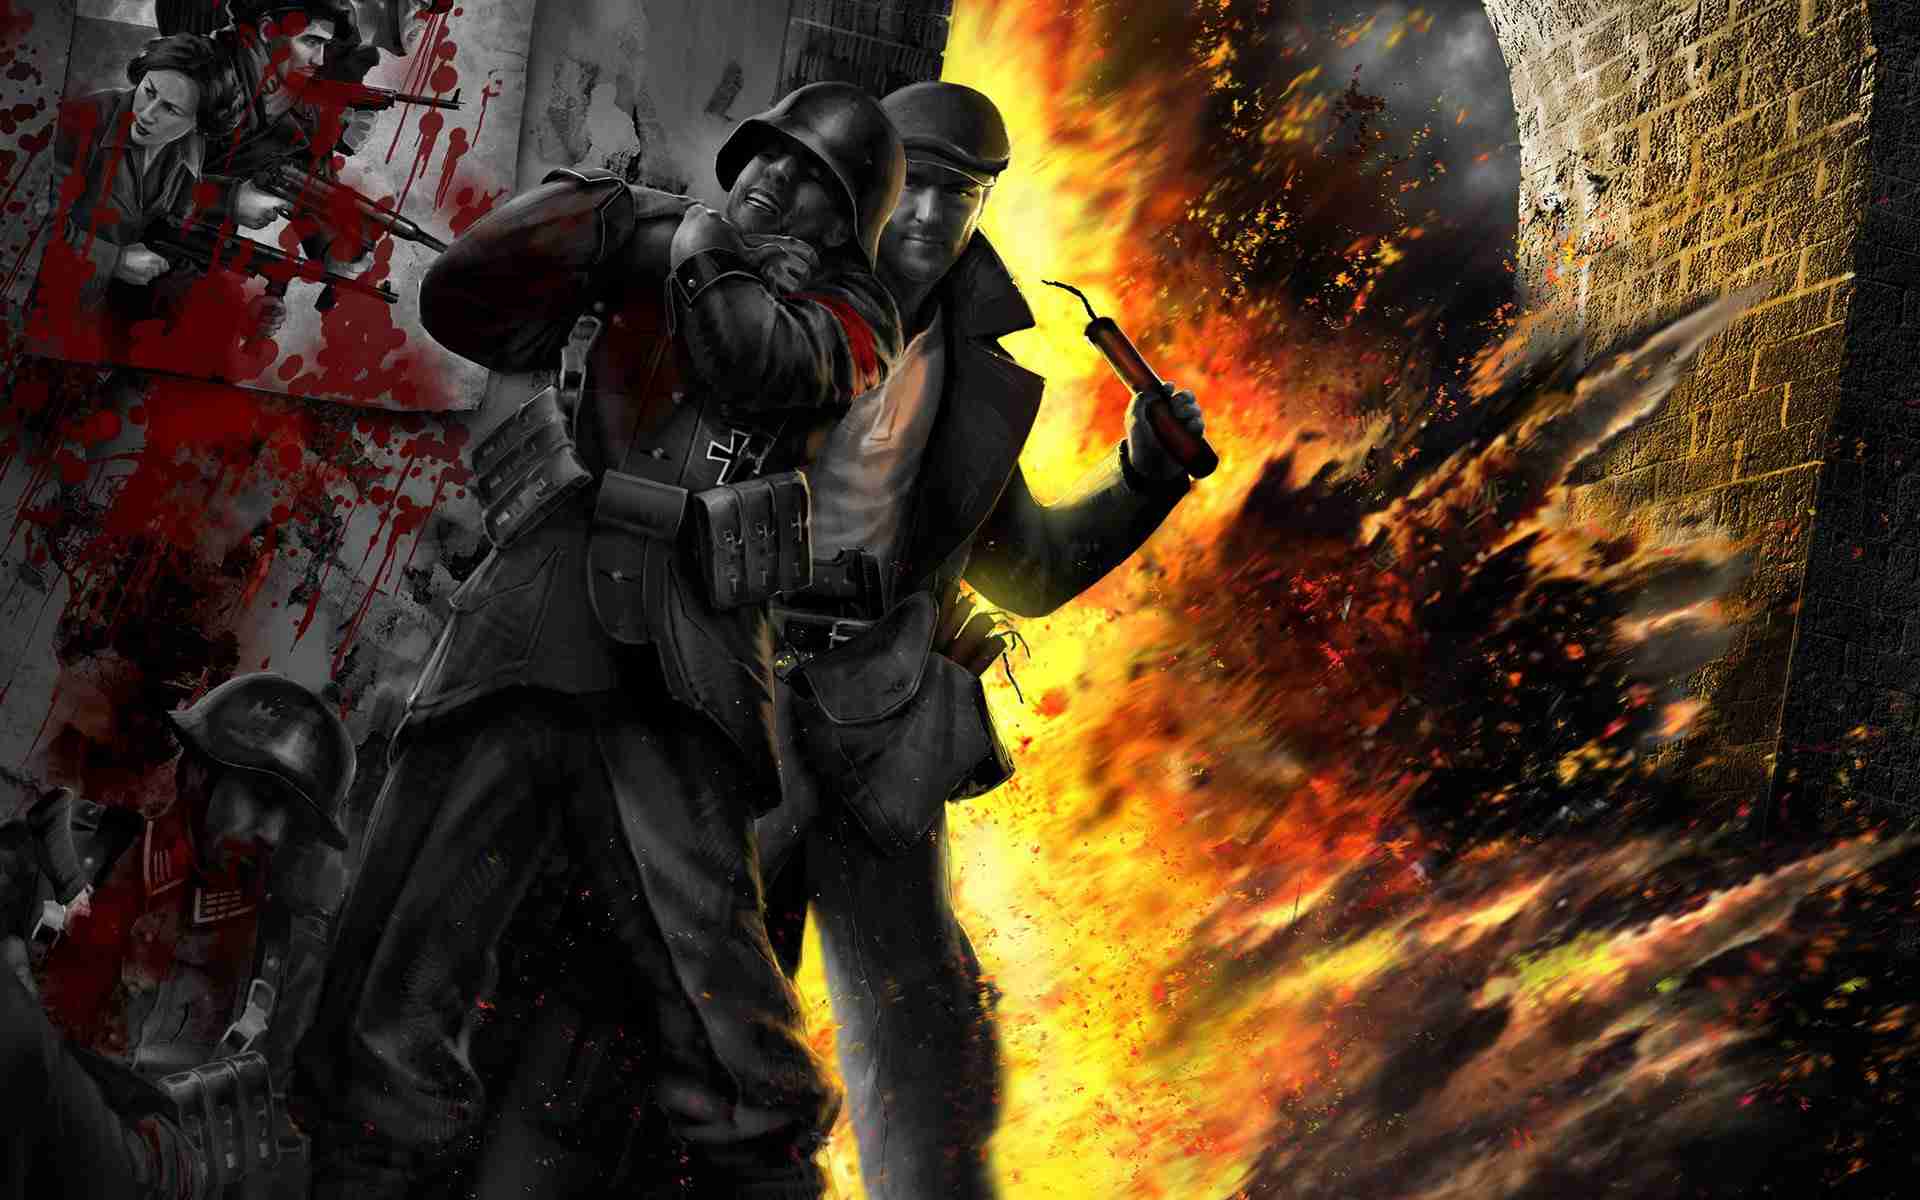 Image Wiki Background The Saboteur Powered By Wikia